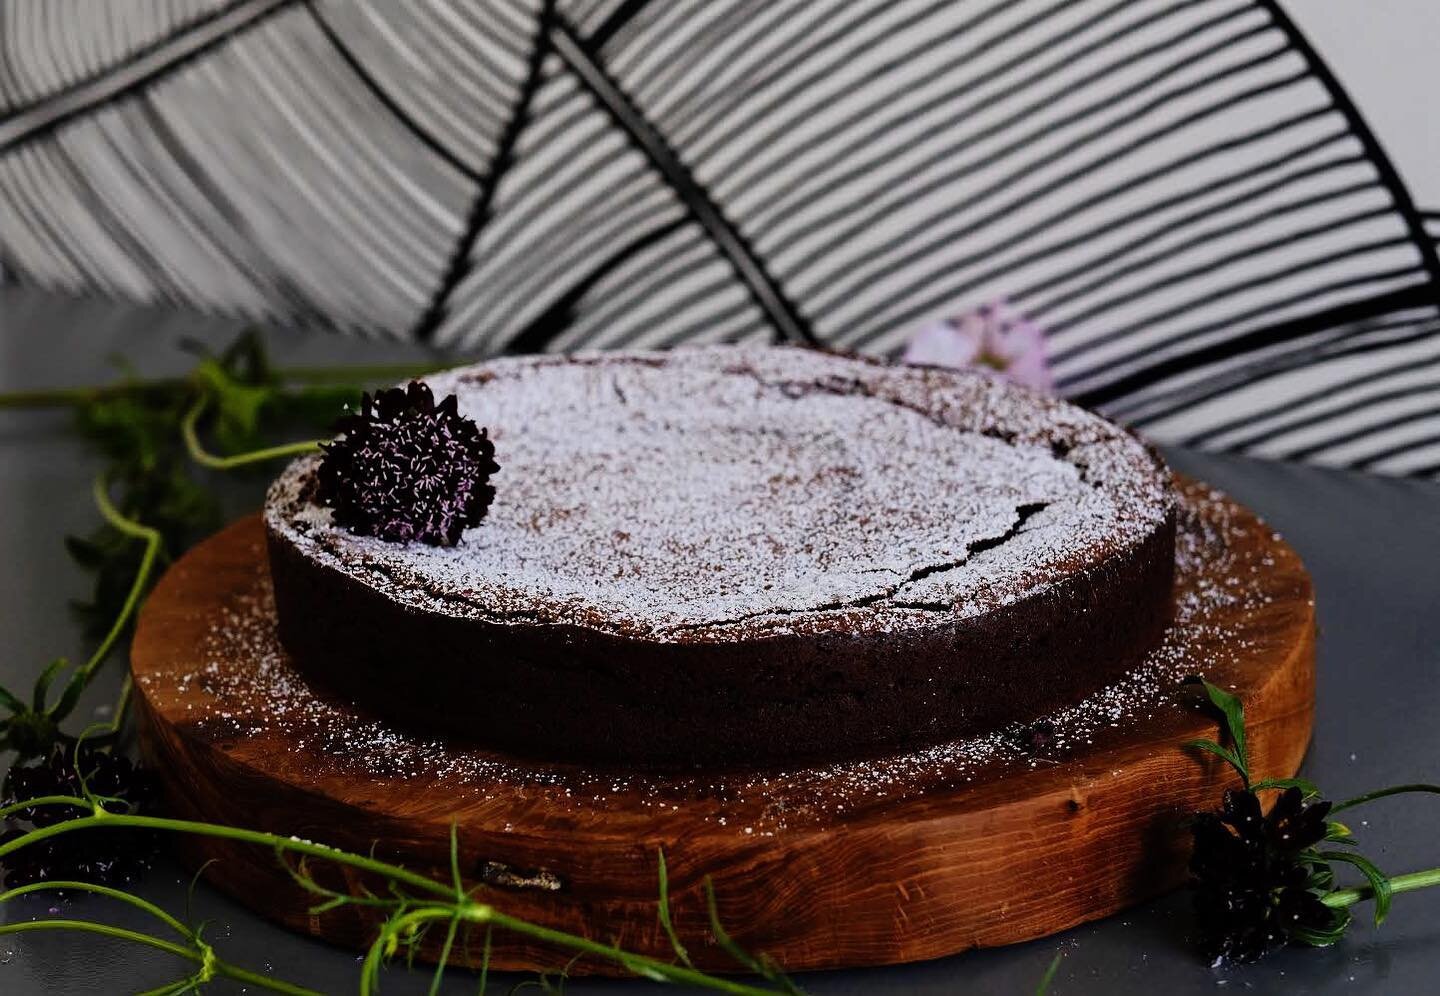 FLOURLESS CHOCOLATE CAKE
a traditional Italian chocolate and almond cake, baked with farm butter and dark chocolate, a slice of this will take you to the dark side with its added shot of @legadocoffee espresso 💥